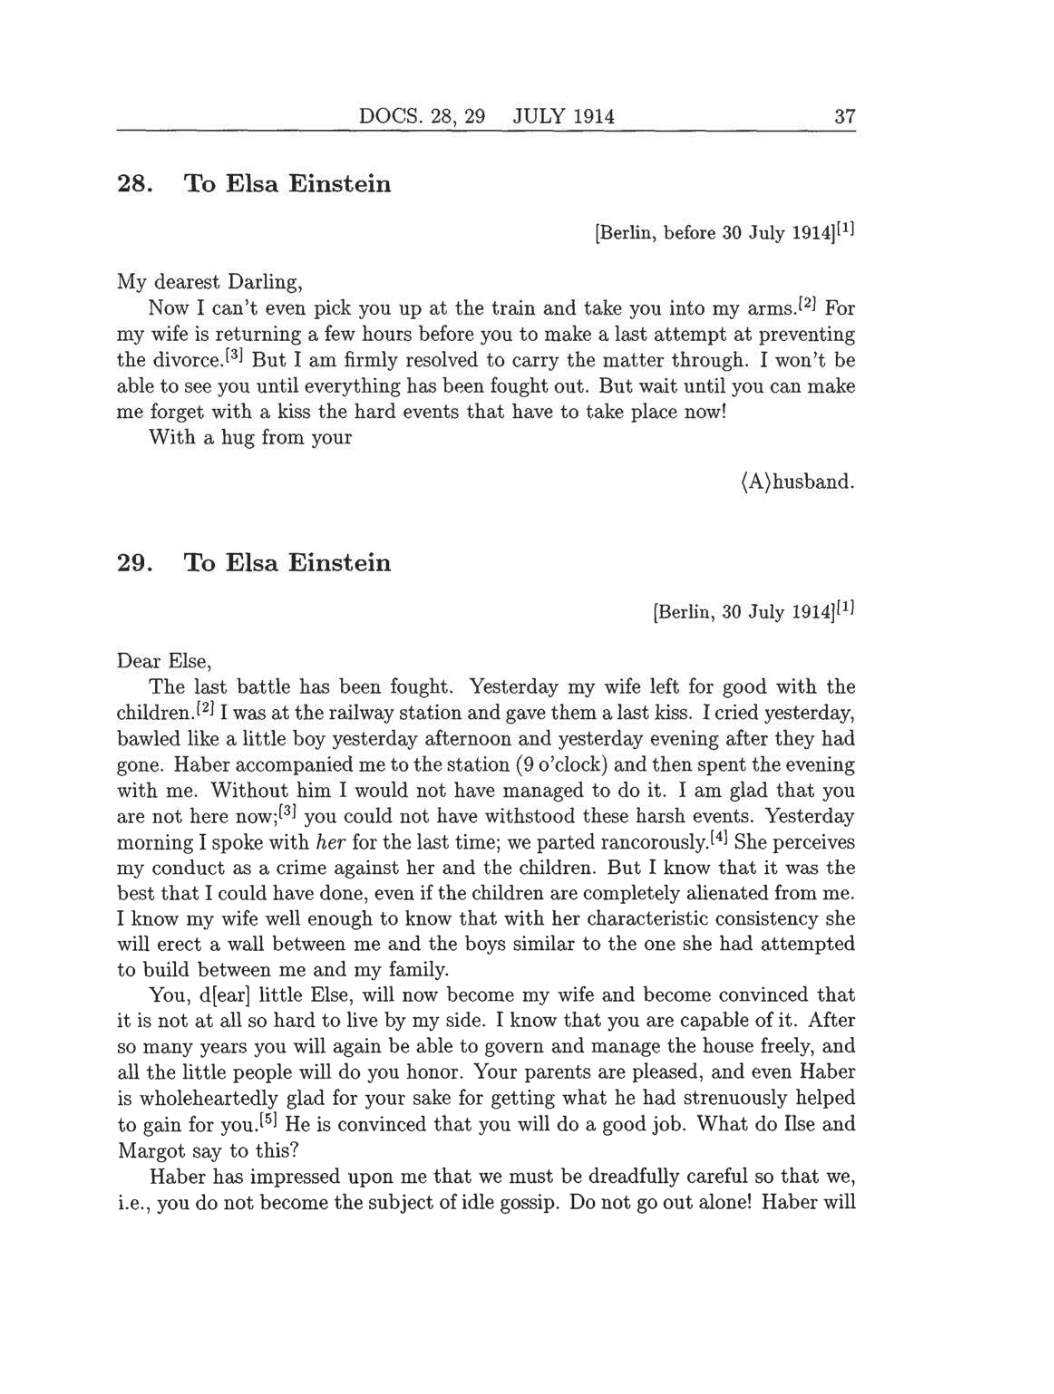 Volume 8: The Berlin Years: Correspondence, 1914-1918 (English translation supplement) page 37